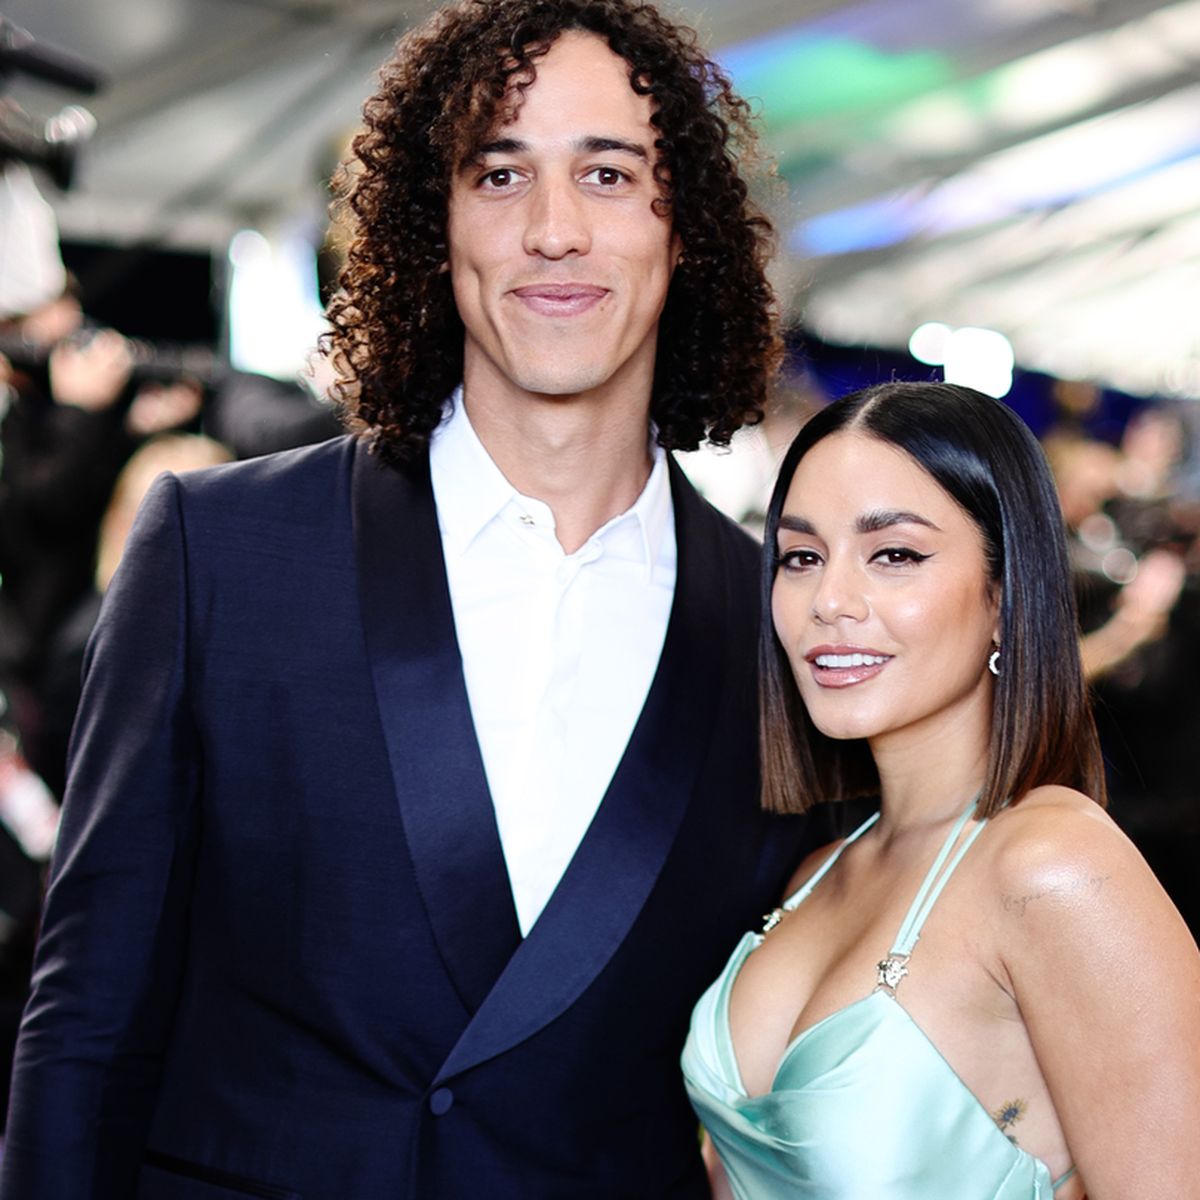 High School Musical alum Vanessa Hudgens reportedly engaged to